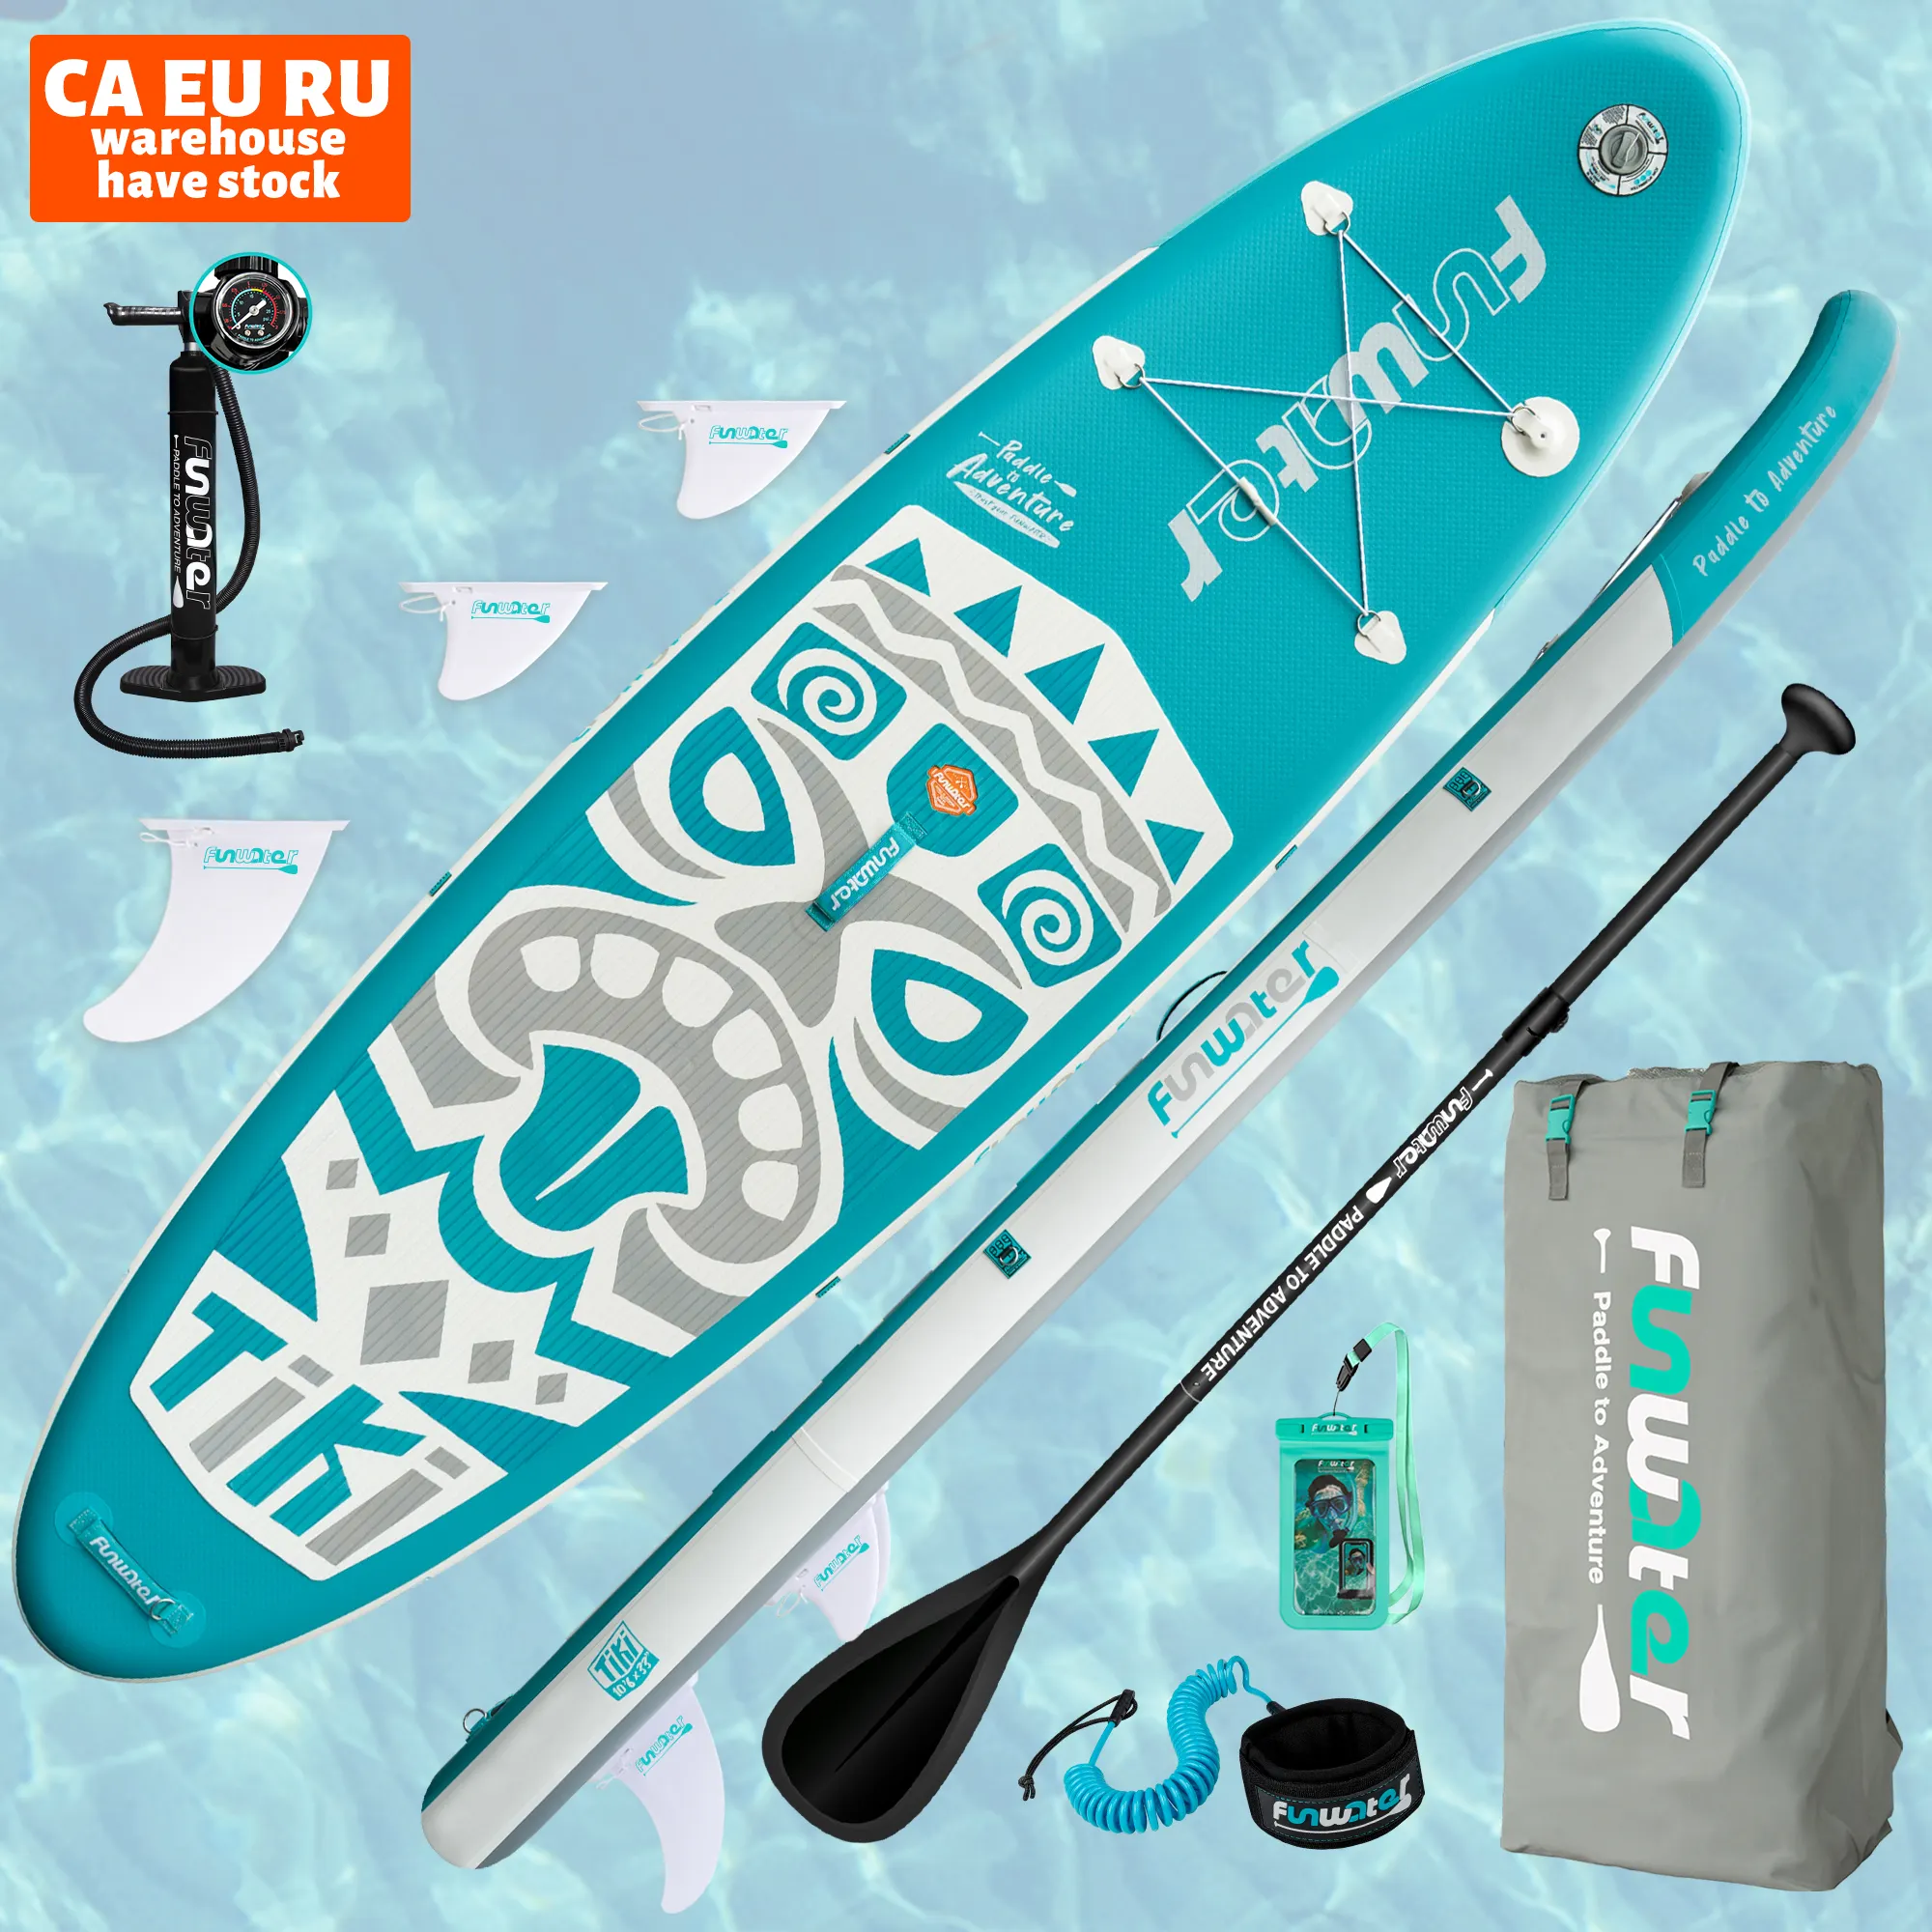 FUNWATER Dropshipping OEM CE Wholesale 10'6" Inflatable SUP StandUp Padle board paddleboard sub board water sports surfing alaia